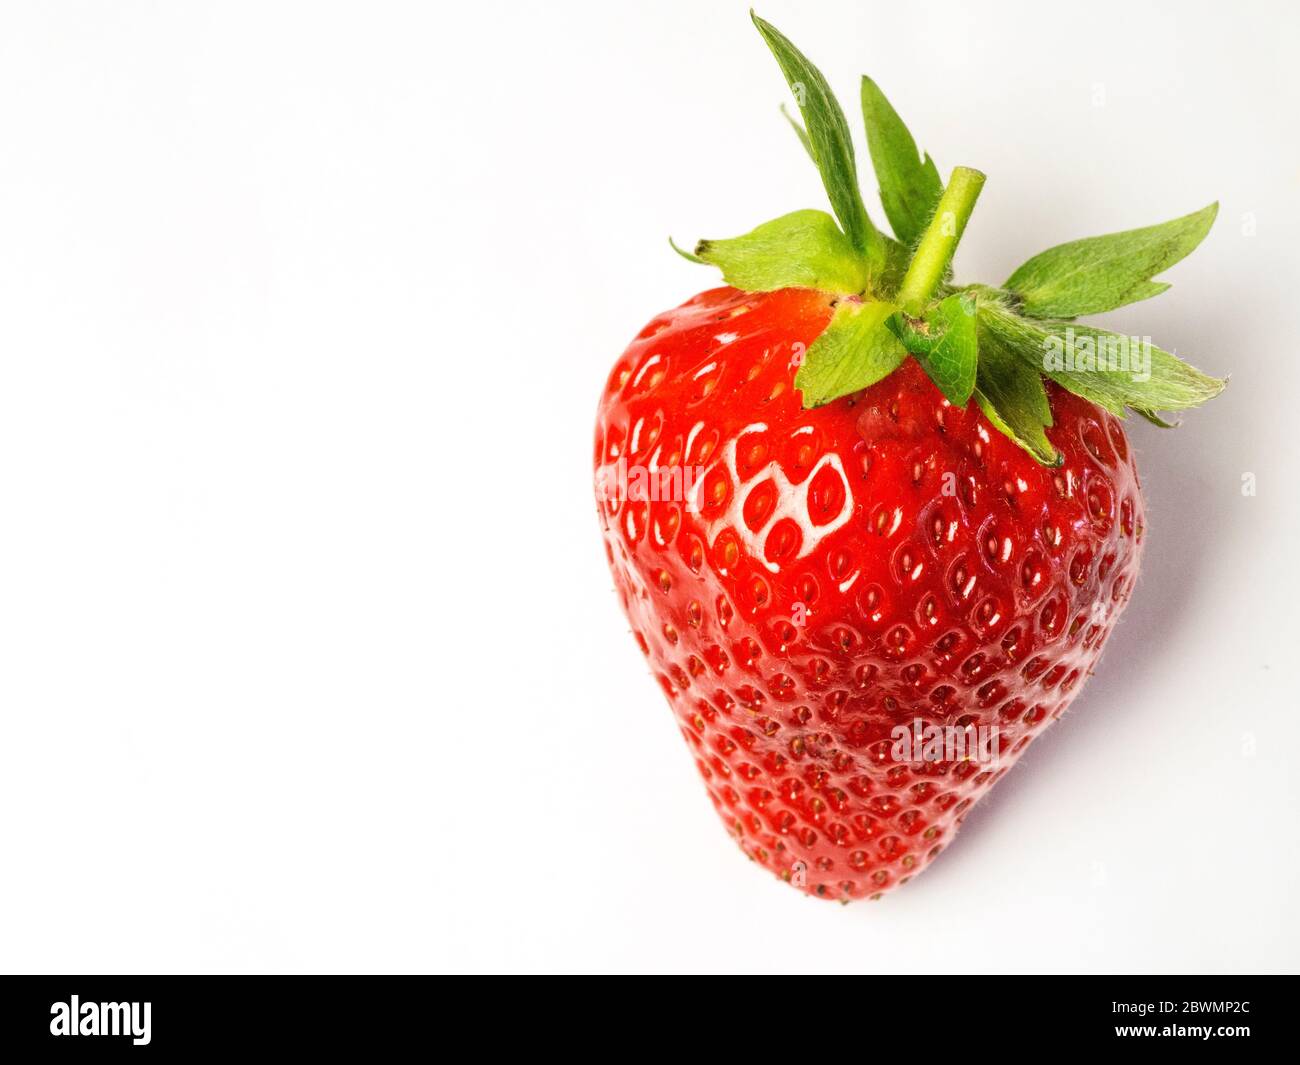 A single strawberry isolated on a white background with copy space Stock Photo